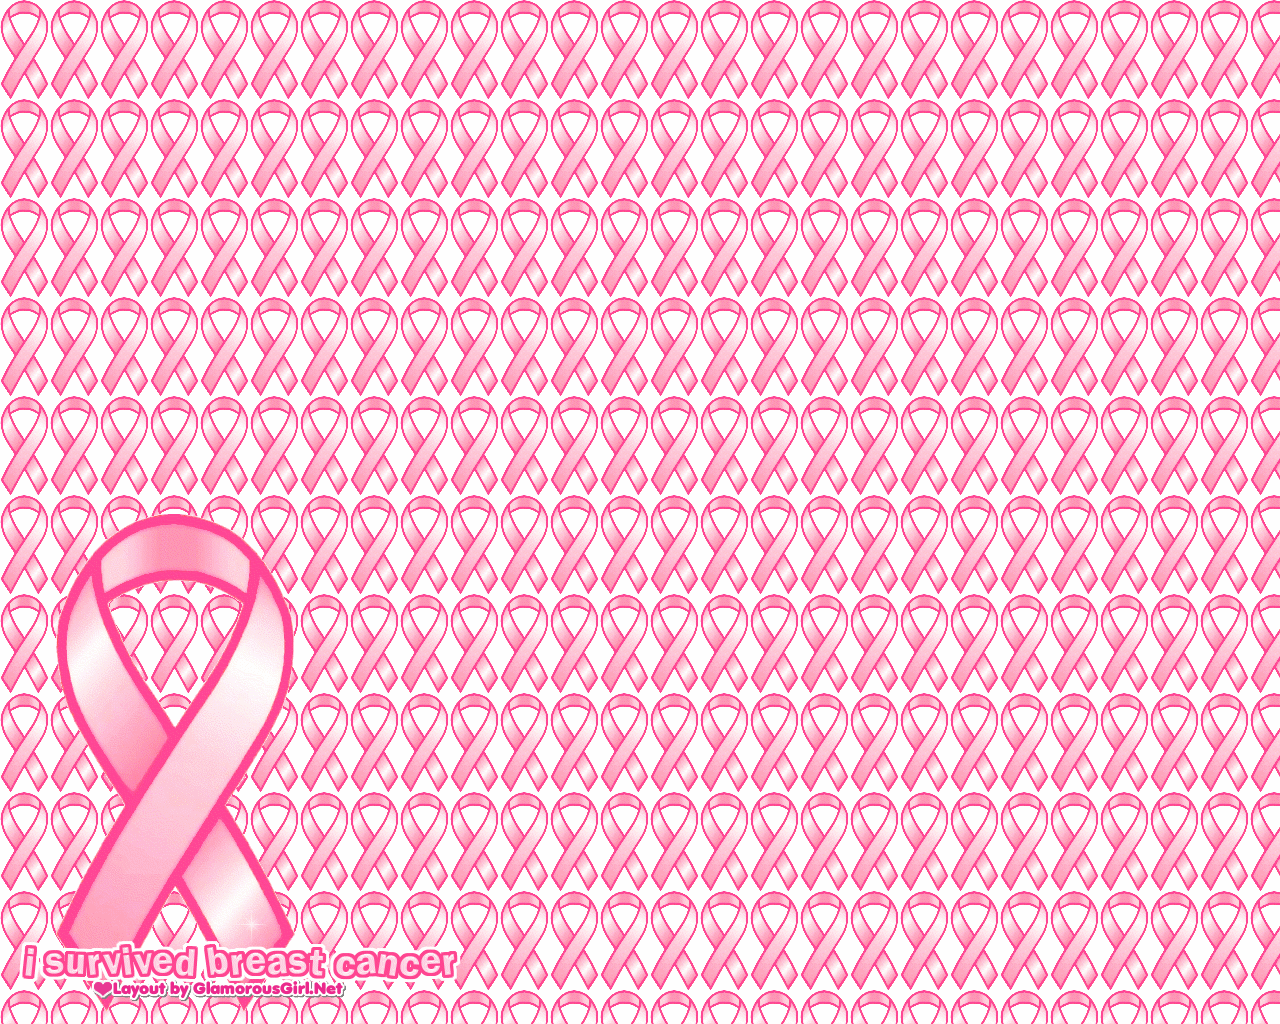 Think Pink Breast Cancer Background Picture Health Site